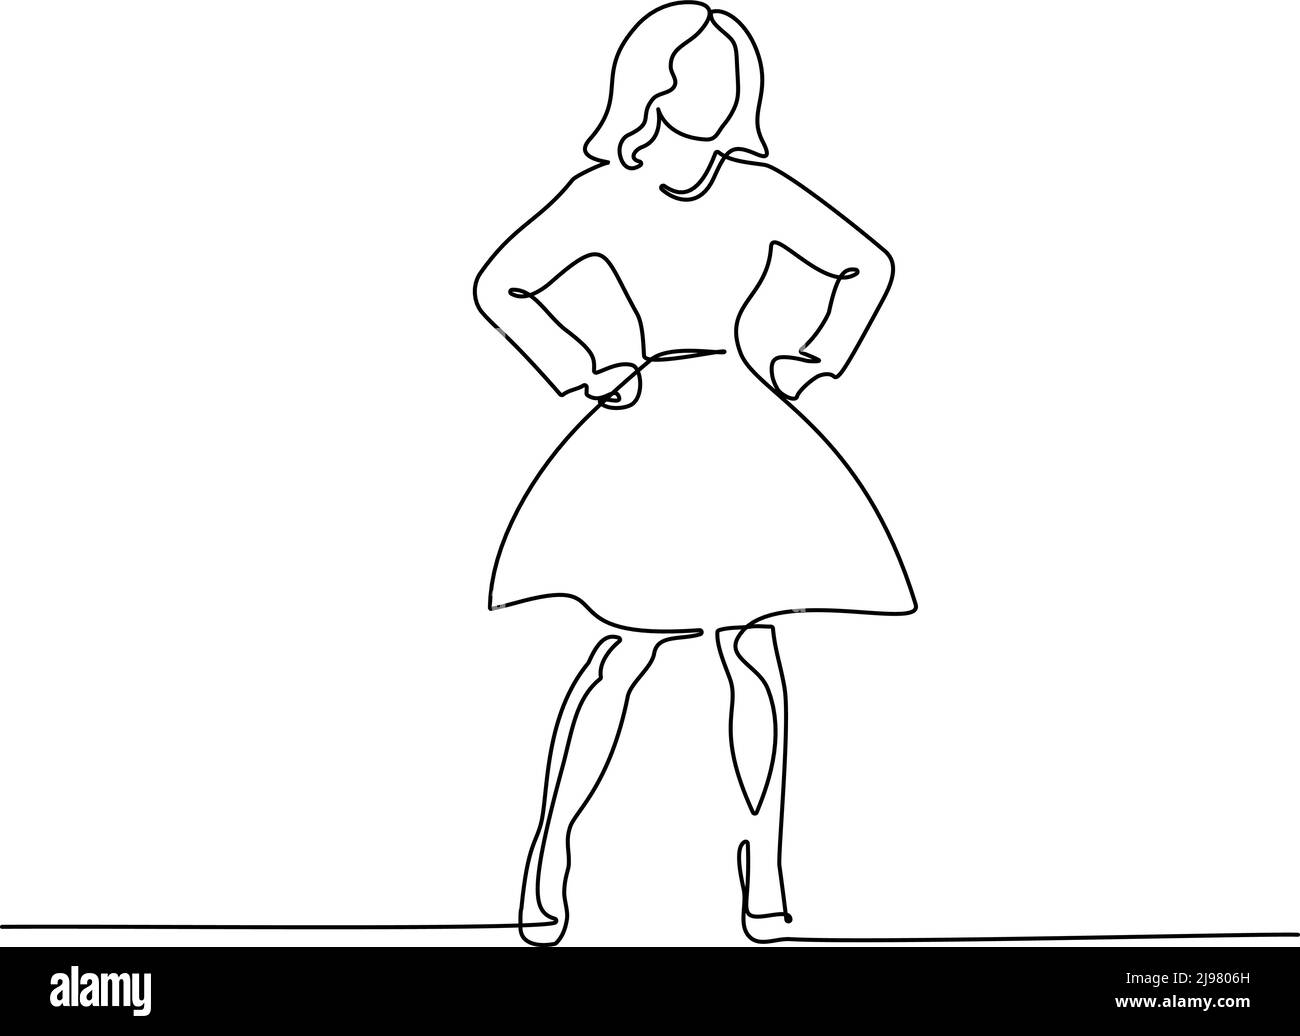 Slender girl standing in dress. Continuous one line drawing. Vector illustration Stock Vector